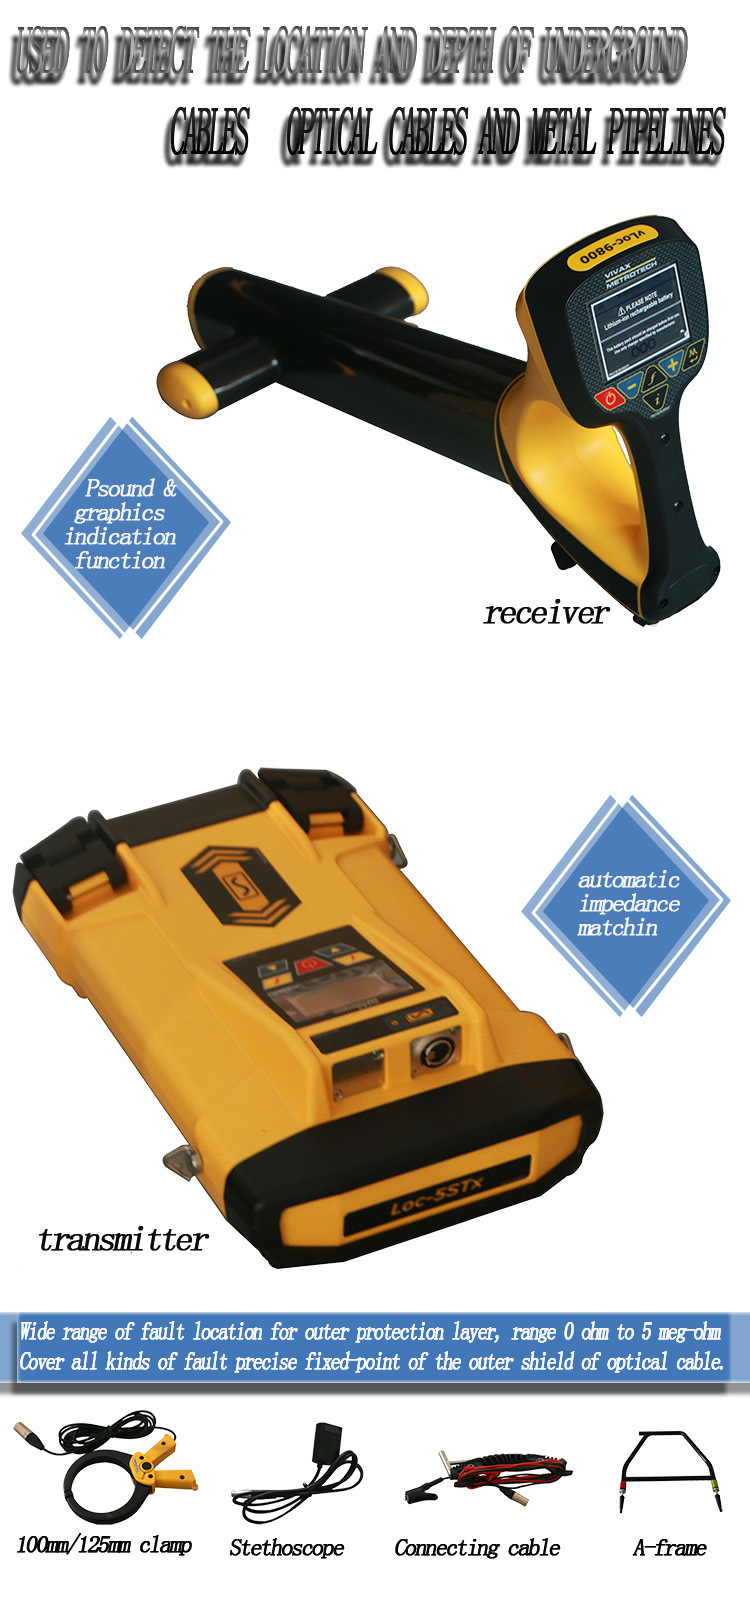 Hm9800 Detector for Underground Cables